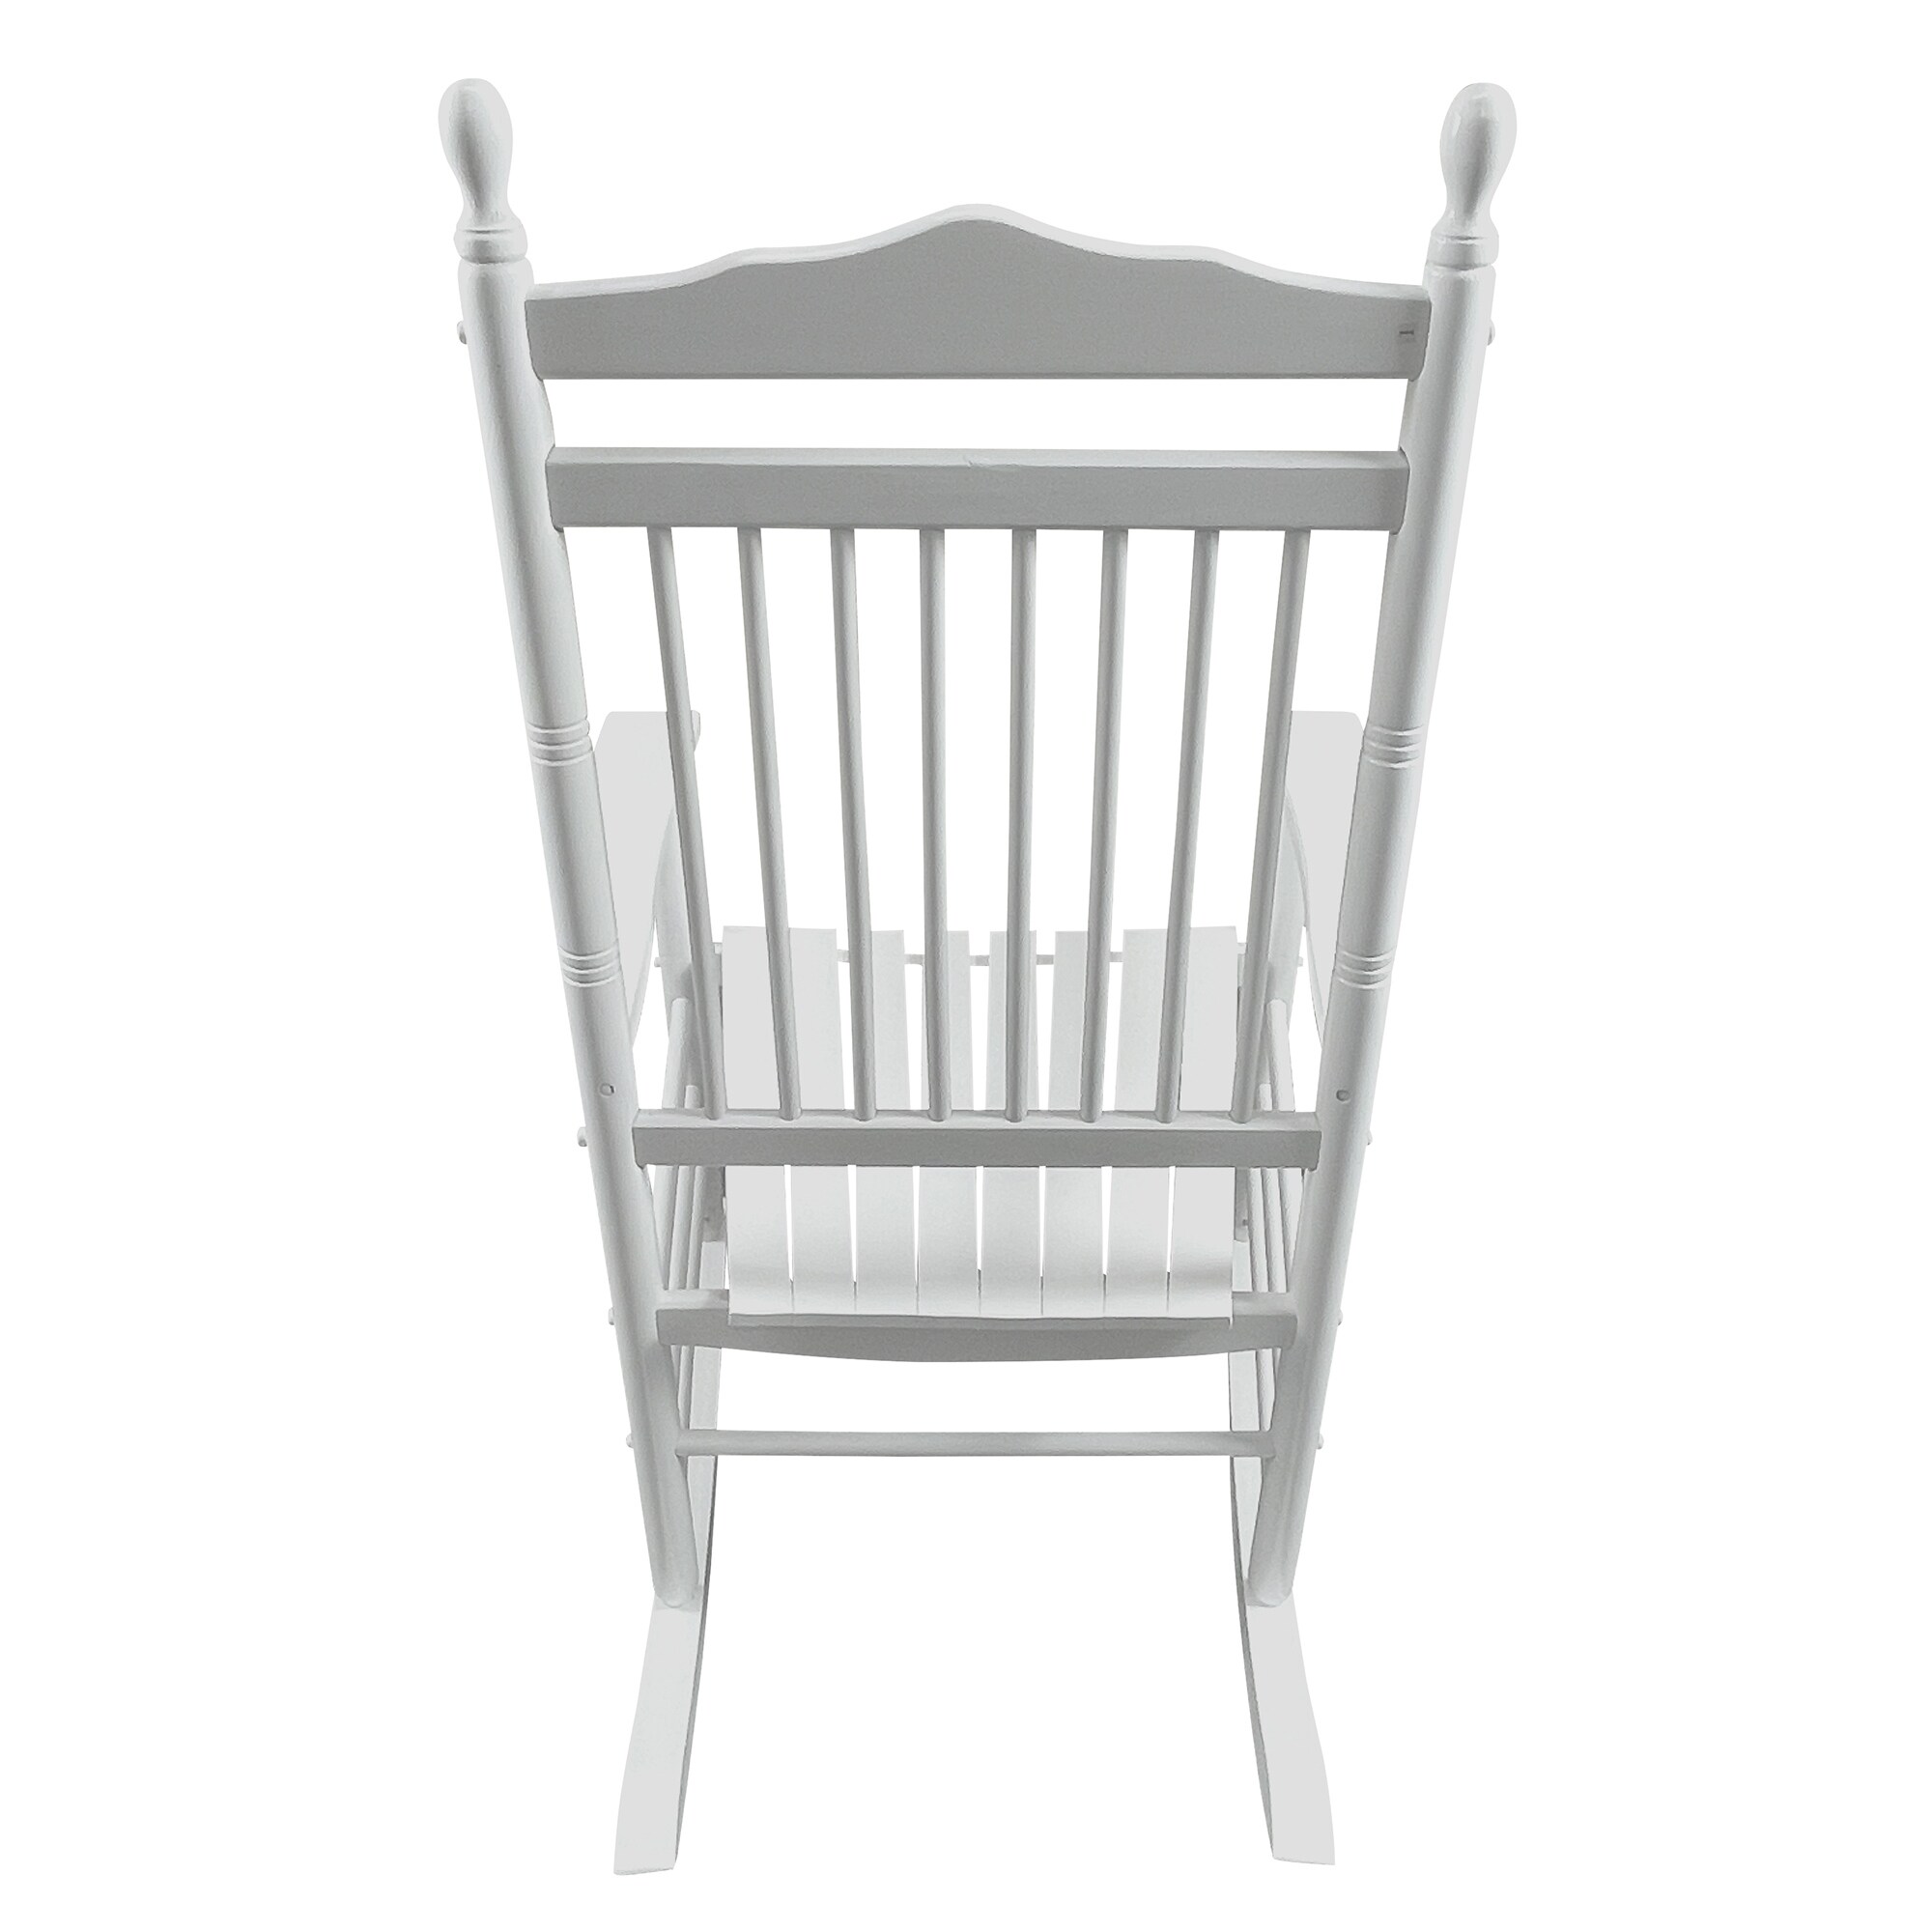 Balcony Porch Adult Rocking Chair - White